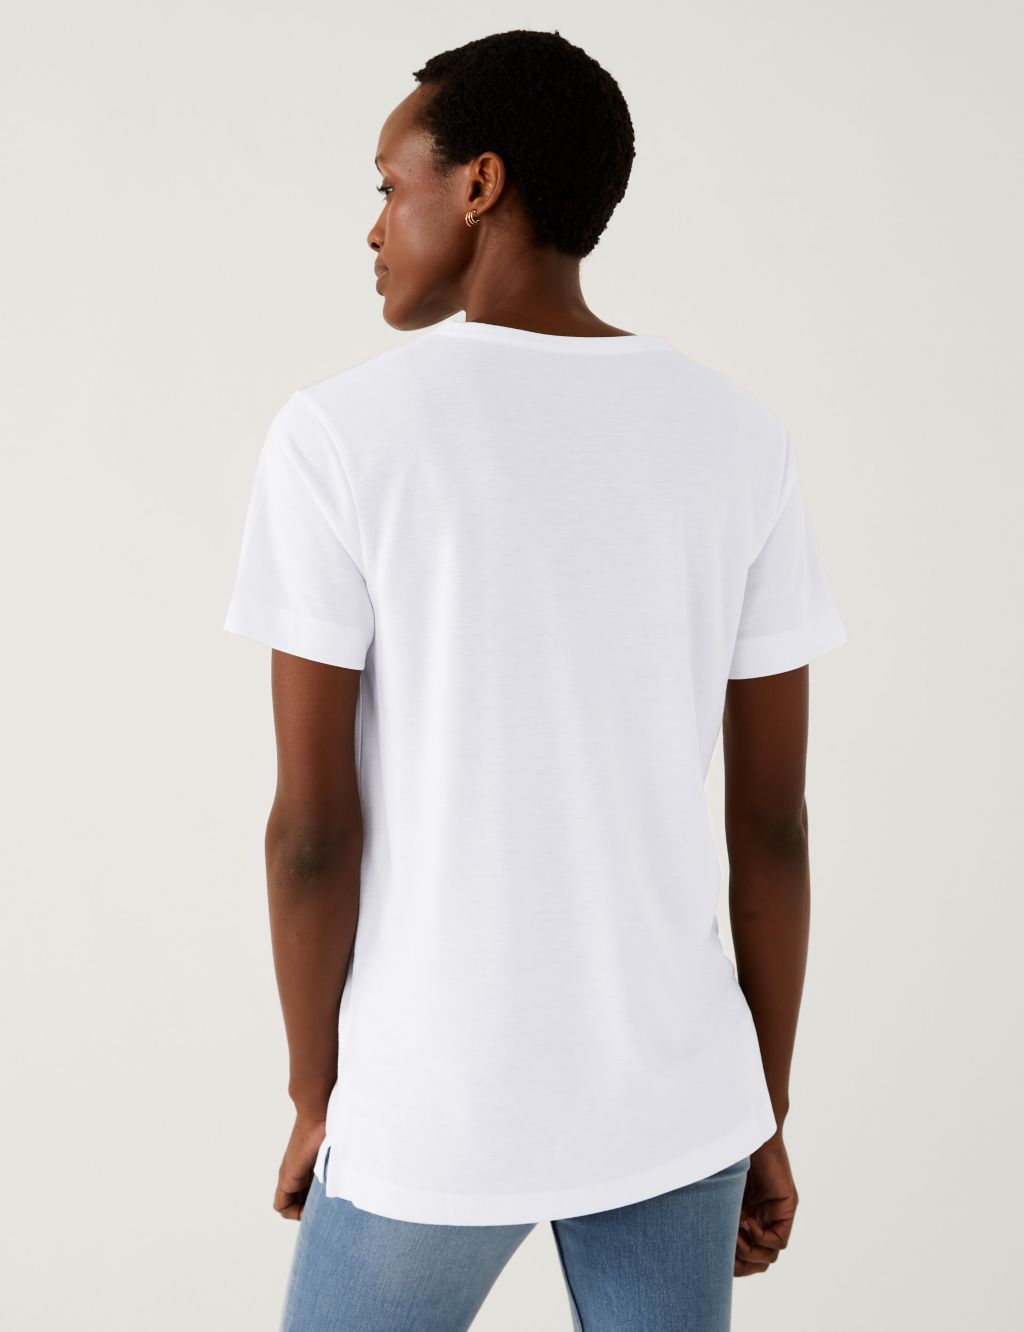 Relaxed Longline T-Shirt image 4